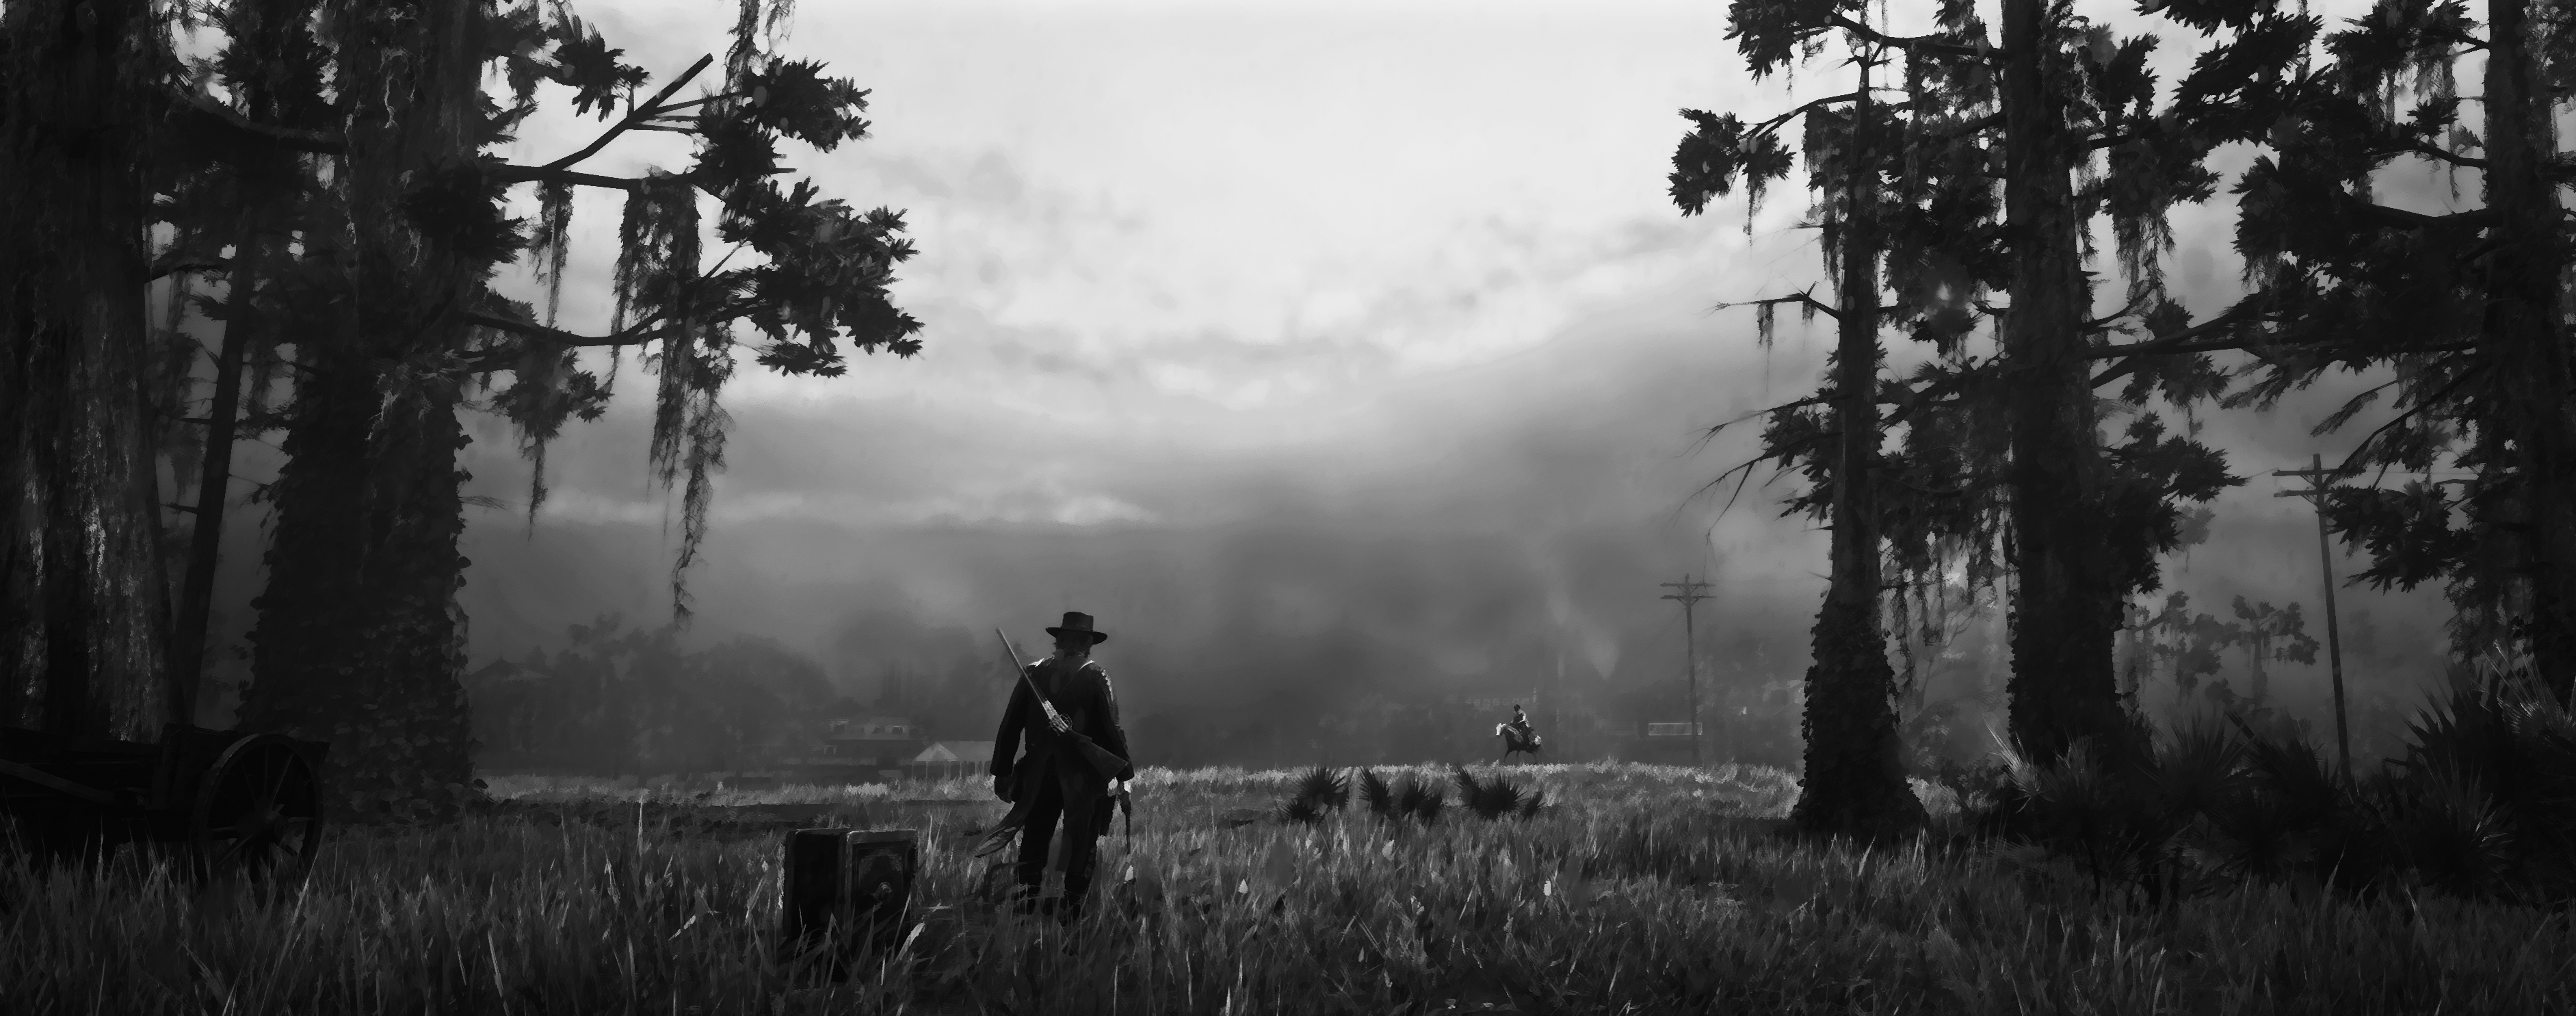 Red Dead Redemption 2 PC Gaming Video Games Monochrome Screen Shot Rockstar Games 3766x1485